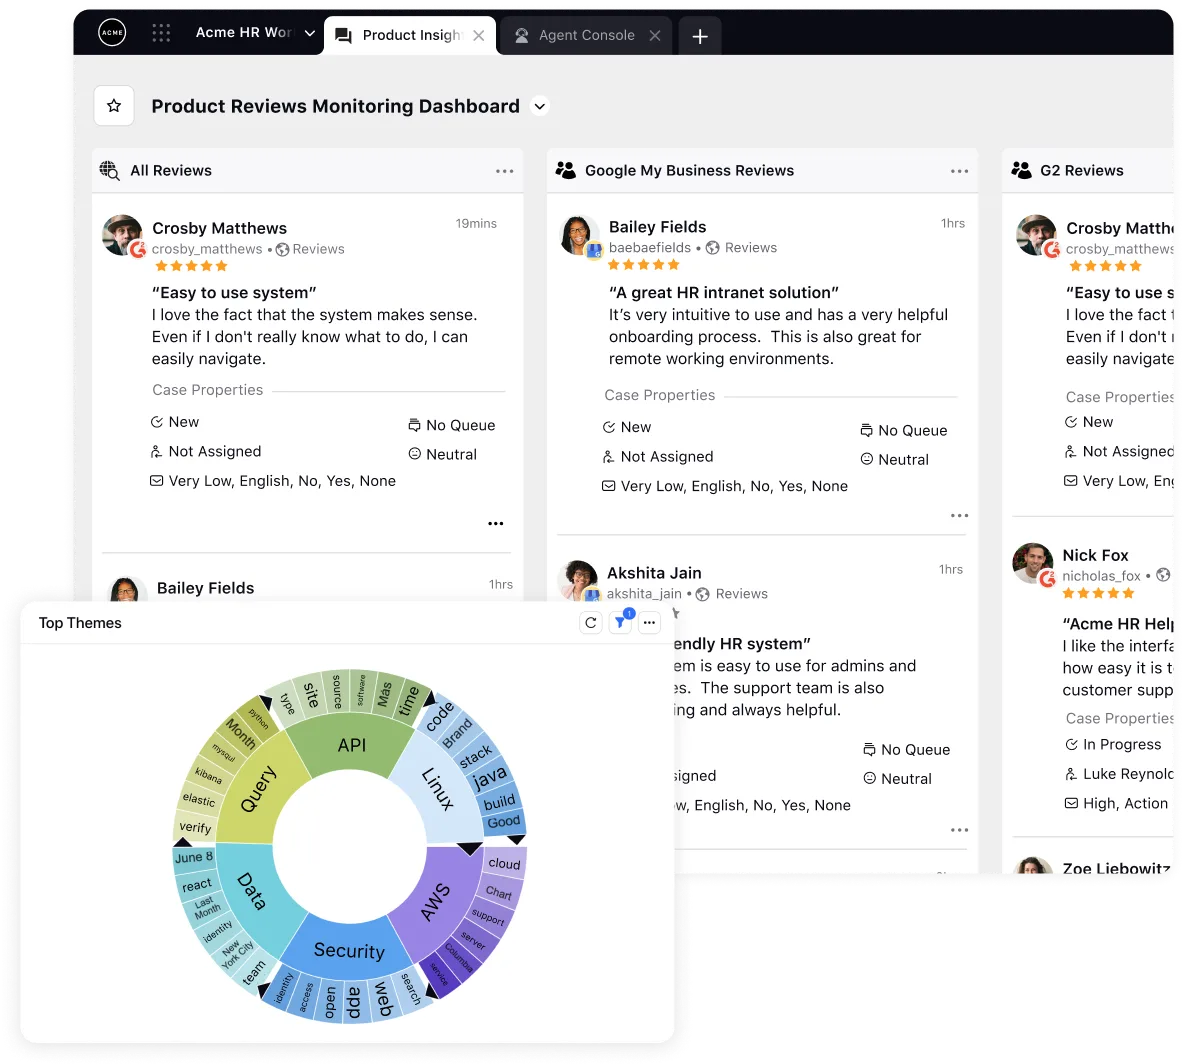 Sprinklr's Product Reviews Monitoring Dashboard centralizes all user comments on a single dashboard.